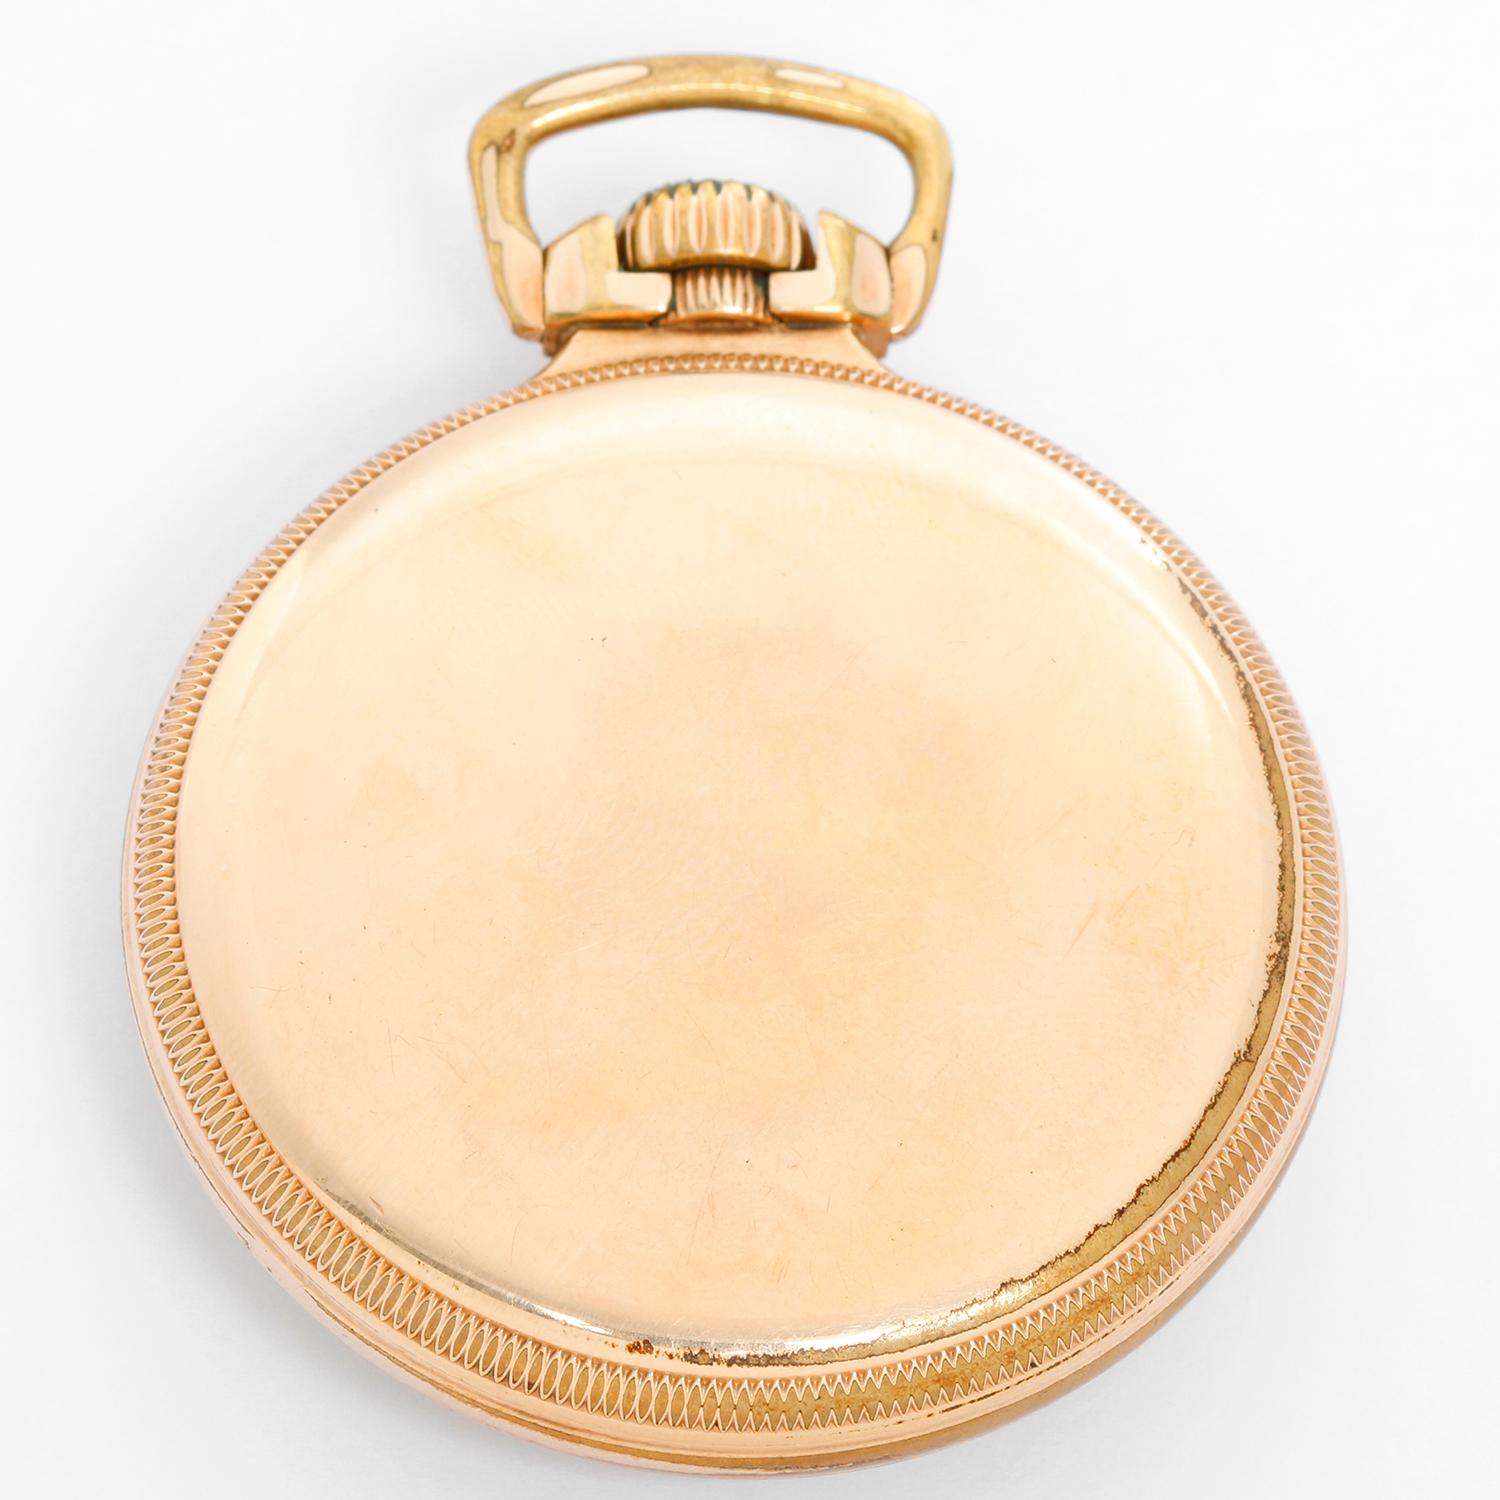 Elgin Pocket Watch - Manual winding.  Gold filled . White enamel with blue hands. Single sunk dial. Manual winding ; 21 Jewel. Dual time zone . Gold filled . White enamel with blue hands. Single sunk dial . Pre-owned with custom box. Railroad